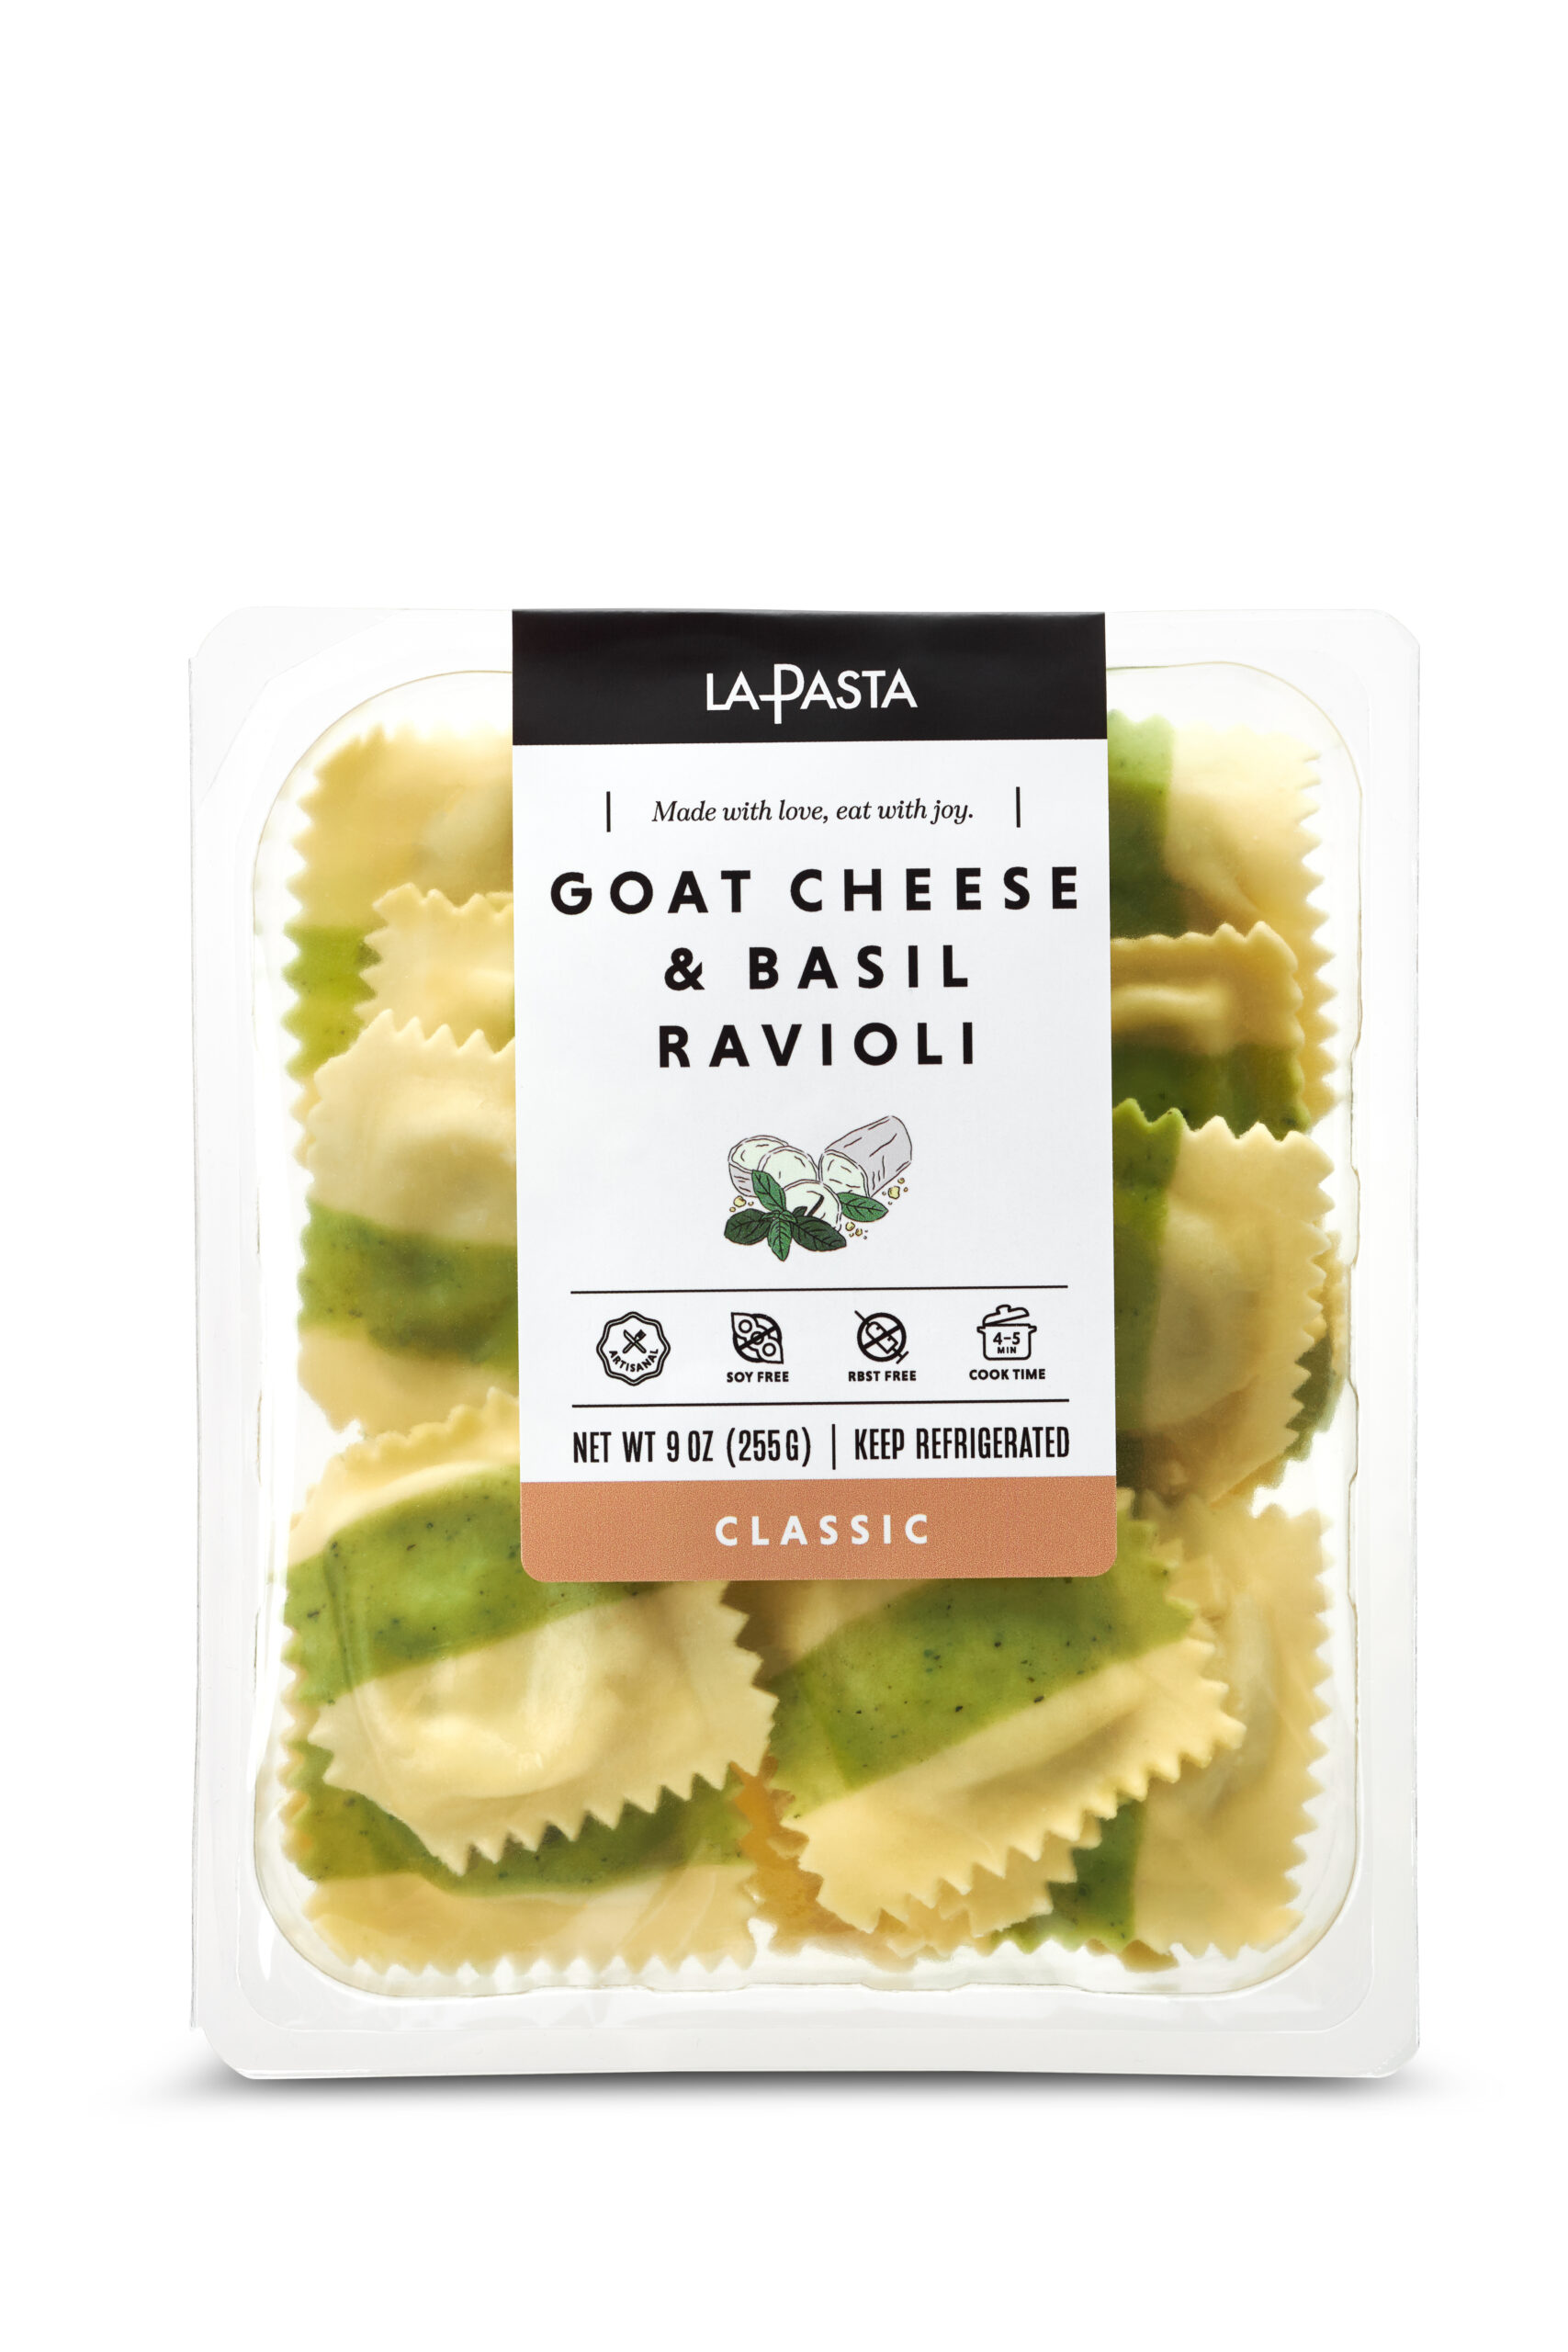 A package of goat cheese and basil ravioli.